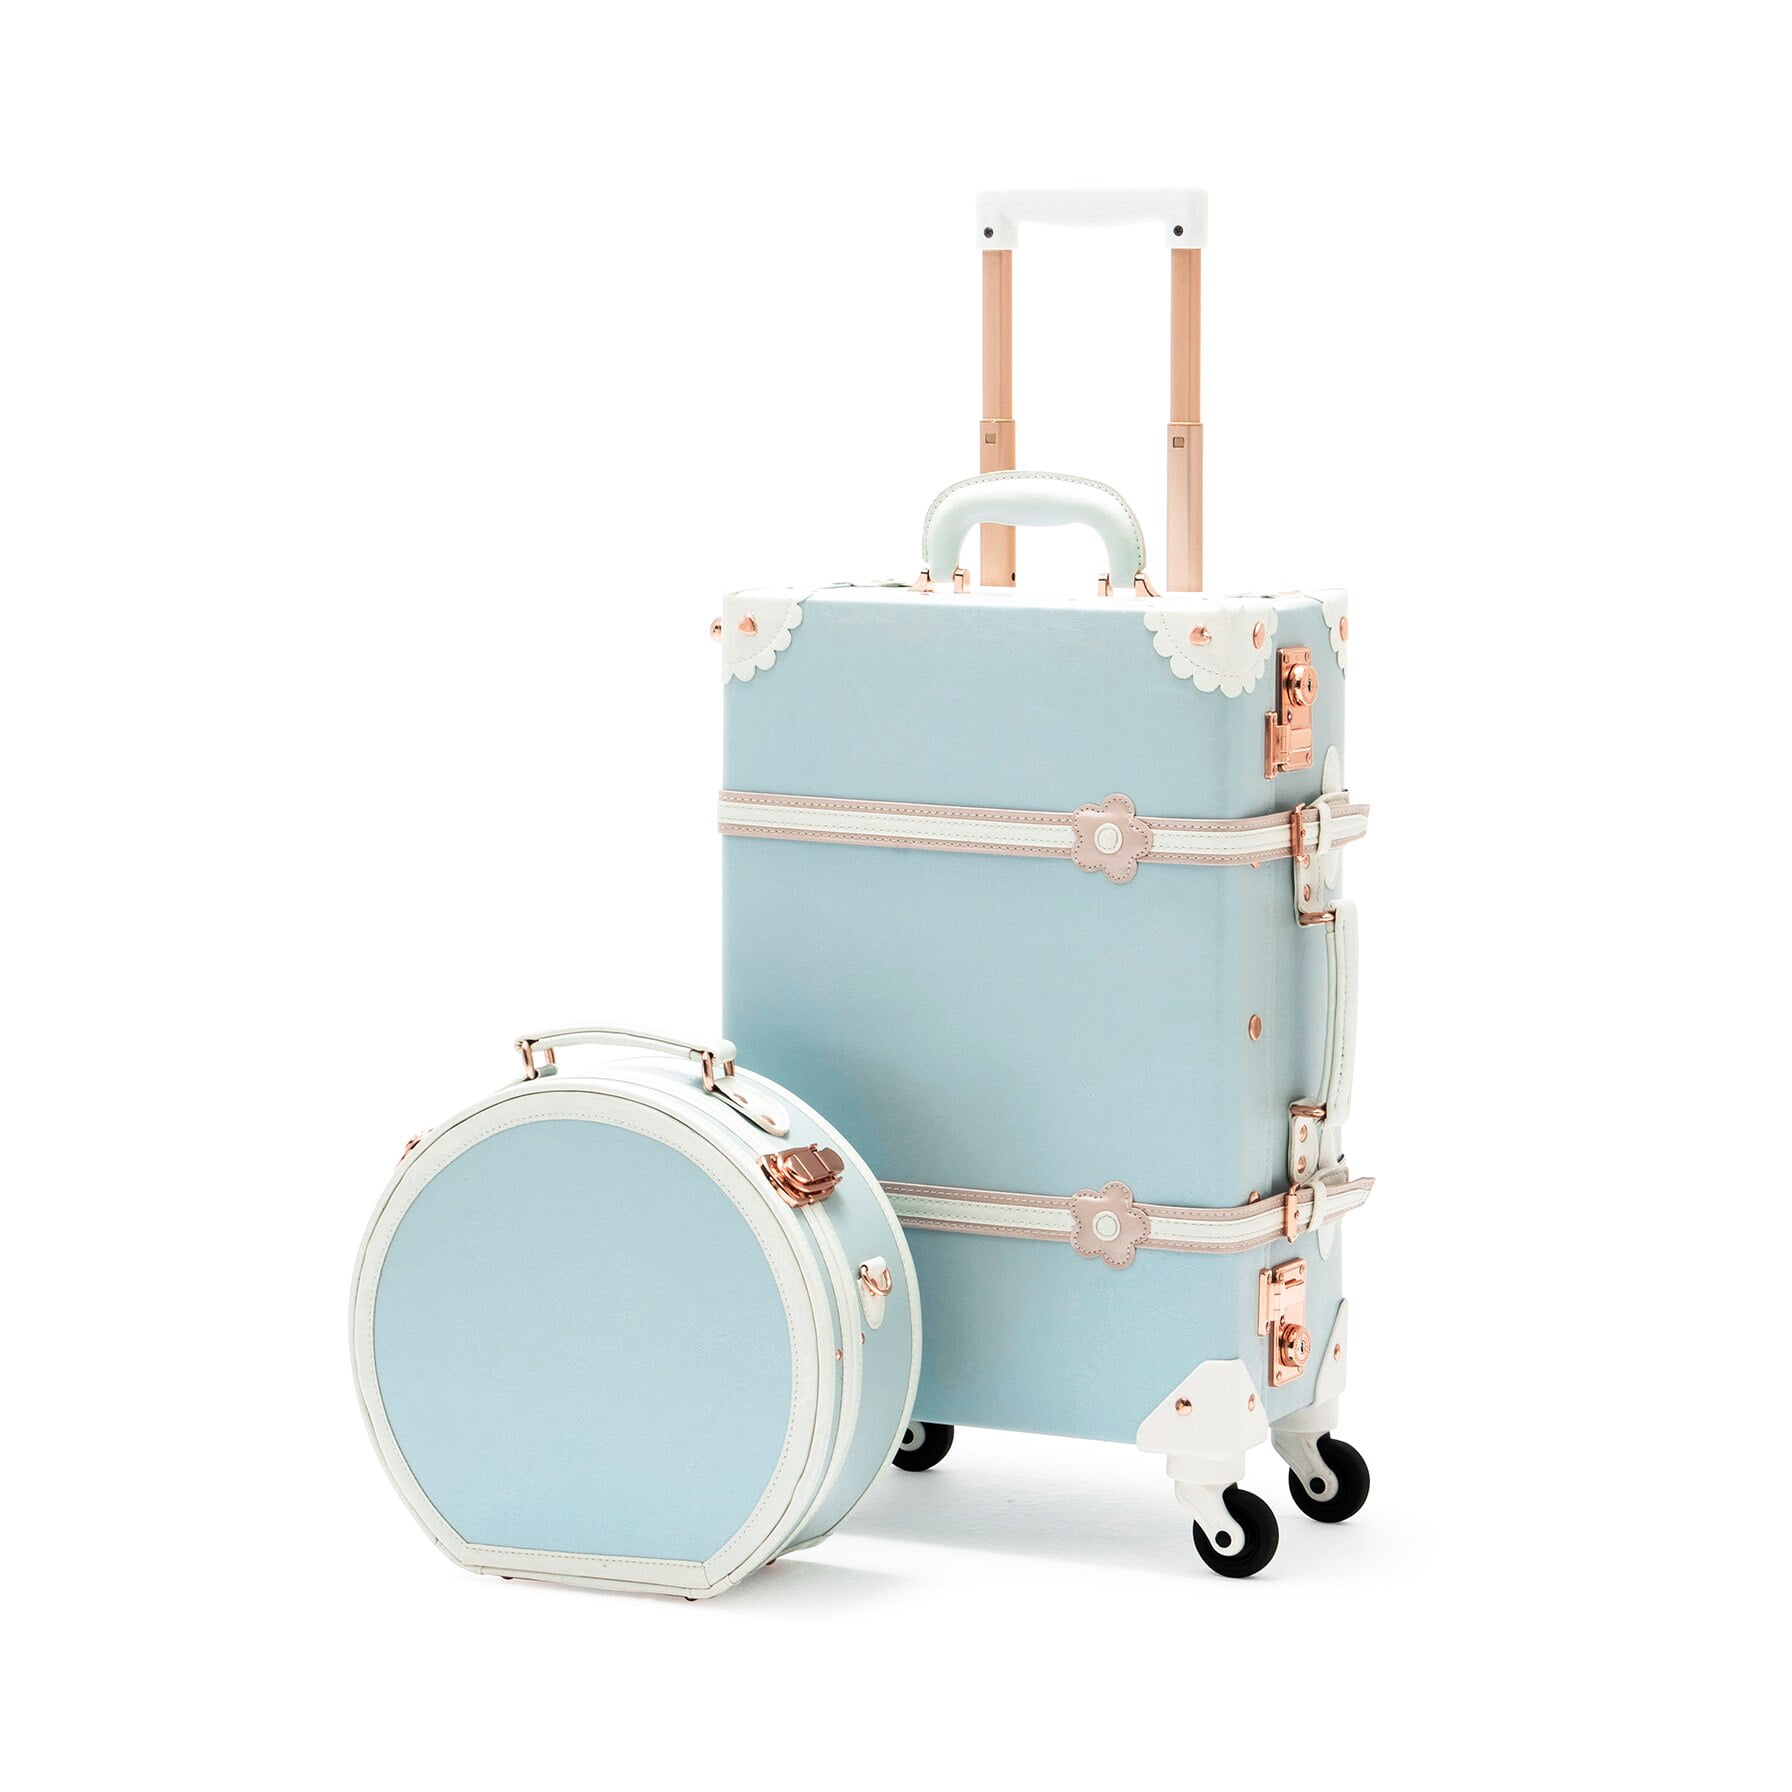 COTRUNKAGE Minimalist 2 Piece Vintage Luggage Sets Travel Carry On Suitcase  for Women with Spinner Wheels, Pearl White 